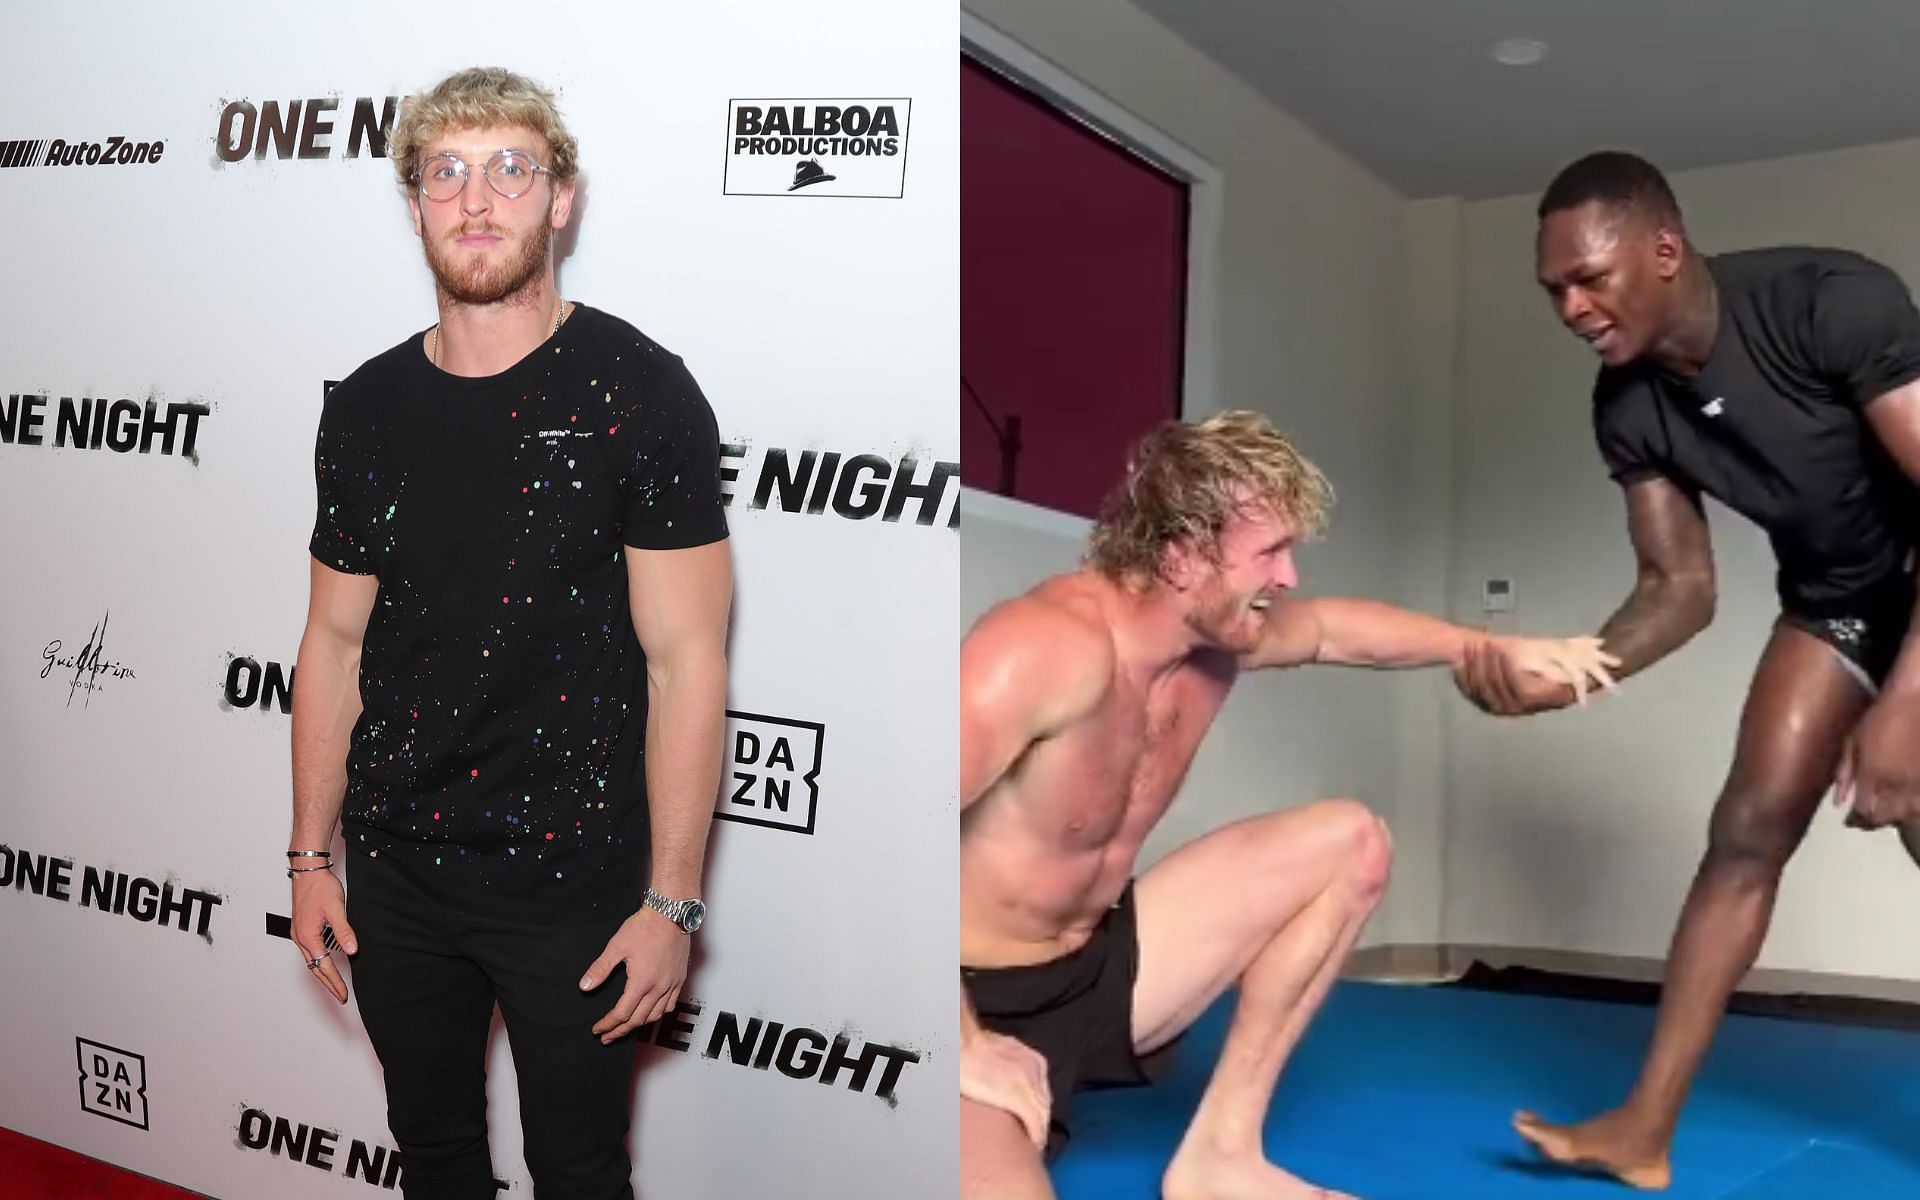 Logan Paul (left) and Israel Adesanya (right) (Image credits Getty Images and @HappyPunchPromo on Twitter)